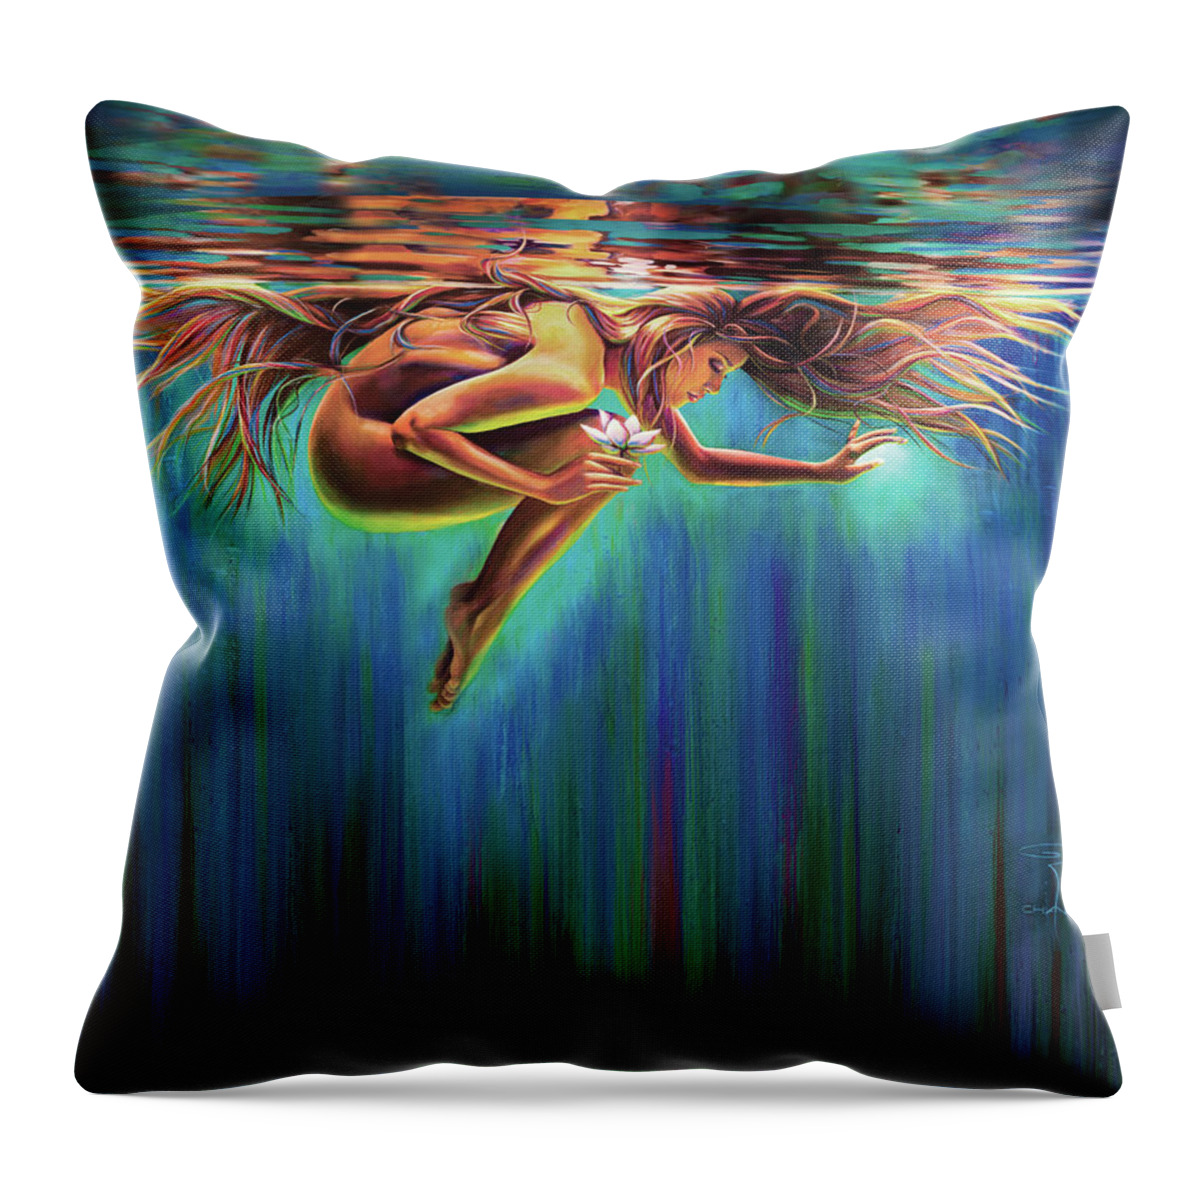 Aquarian Rebirth Woman Underwater Emotional Receptive Sensitive Lotus Sacred Divine Feminine Water Watercolor Floating Age Of Aquarius Fetal Position Goddess Spiritual Consciousness Moss Curled Up Long Hair Flowing Reflection Mermaid Awakening Rebirth Inner Journey Going Within Internal World Holding Breath Peace Love Gentle Beauty Swimming Floating Ethereal Whimsical Peaceful Quiet Enlightenment Throw Pillow featuring the painting Aquarian Rebirth by Robyn Chance